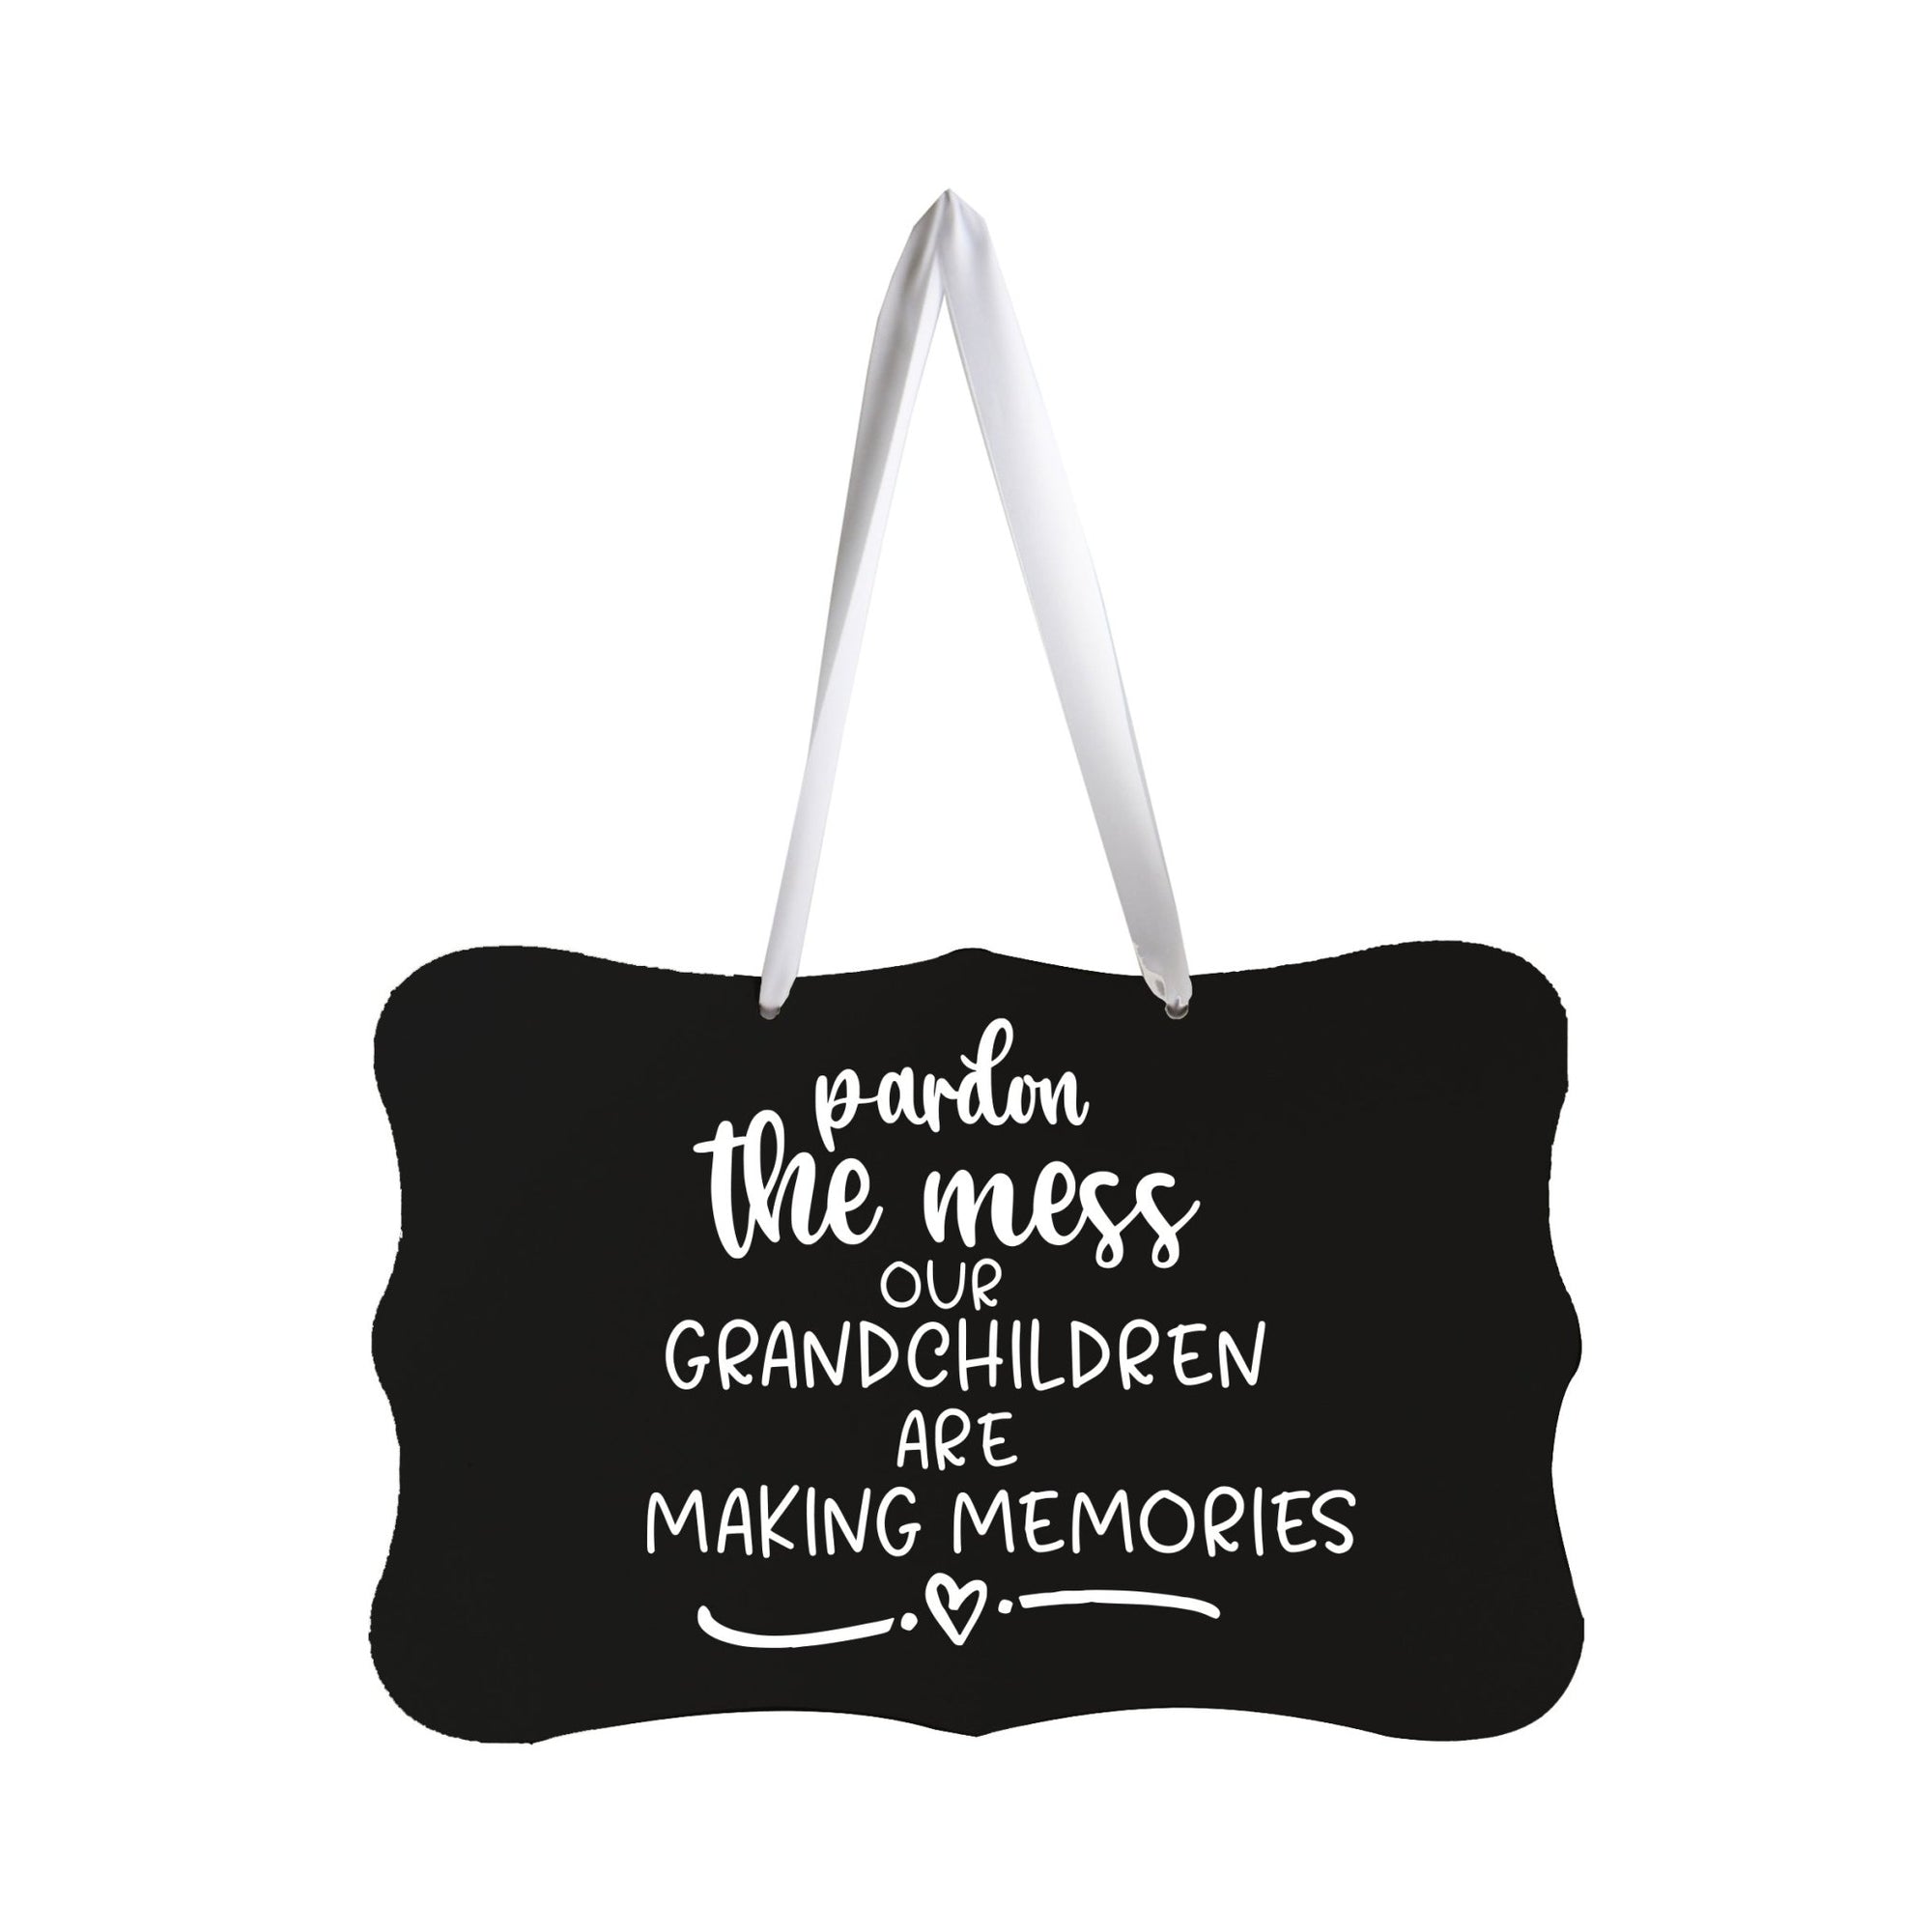 Modern Inspirational Wooden Wall Hanging Sign for Home Decorations 8x12 - Pardon The Mess Our Grandchildren - LifeSong Milestones